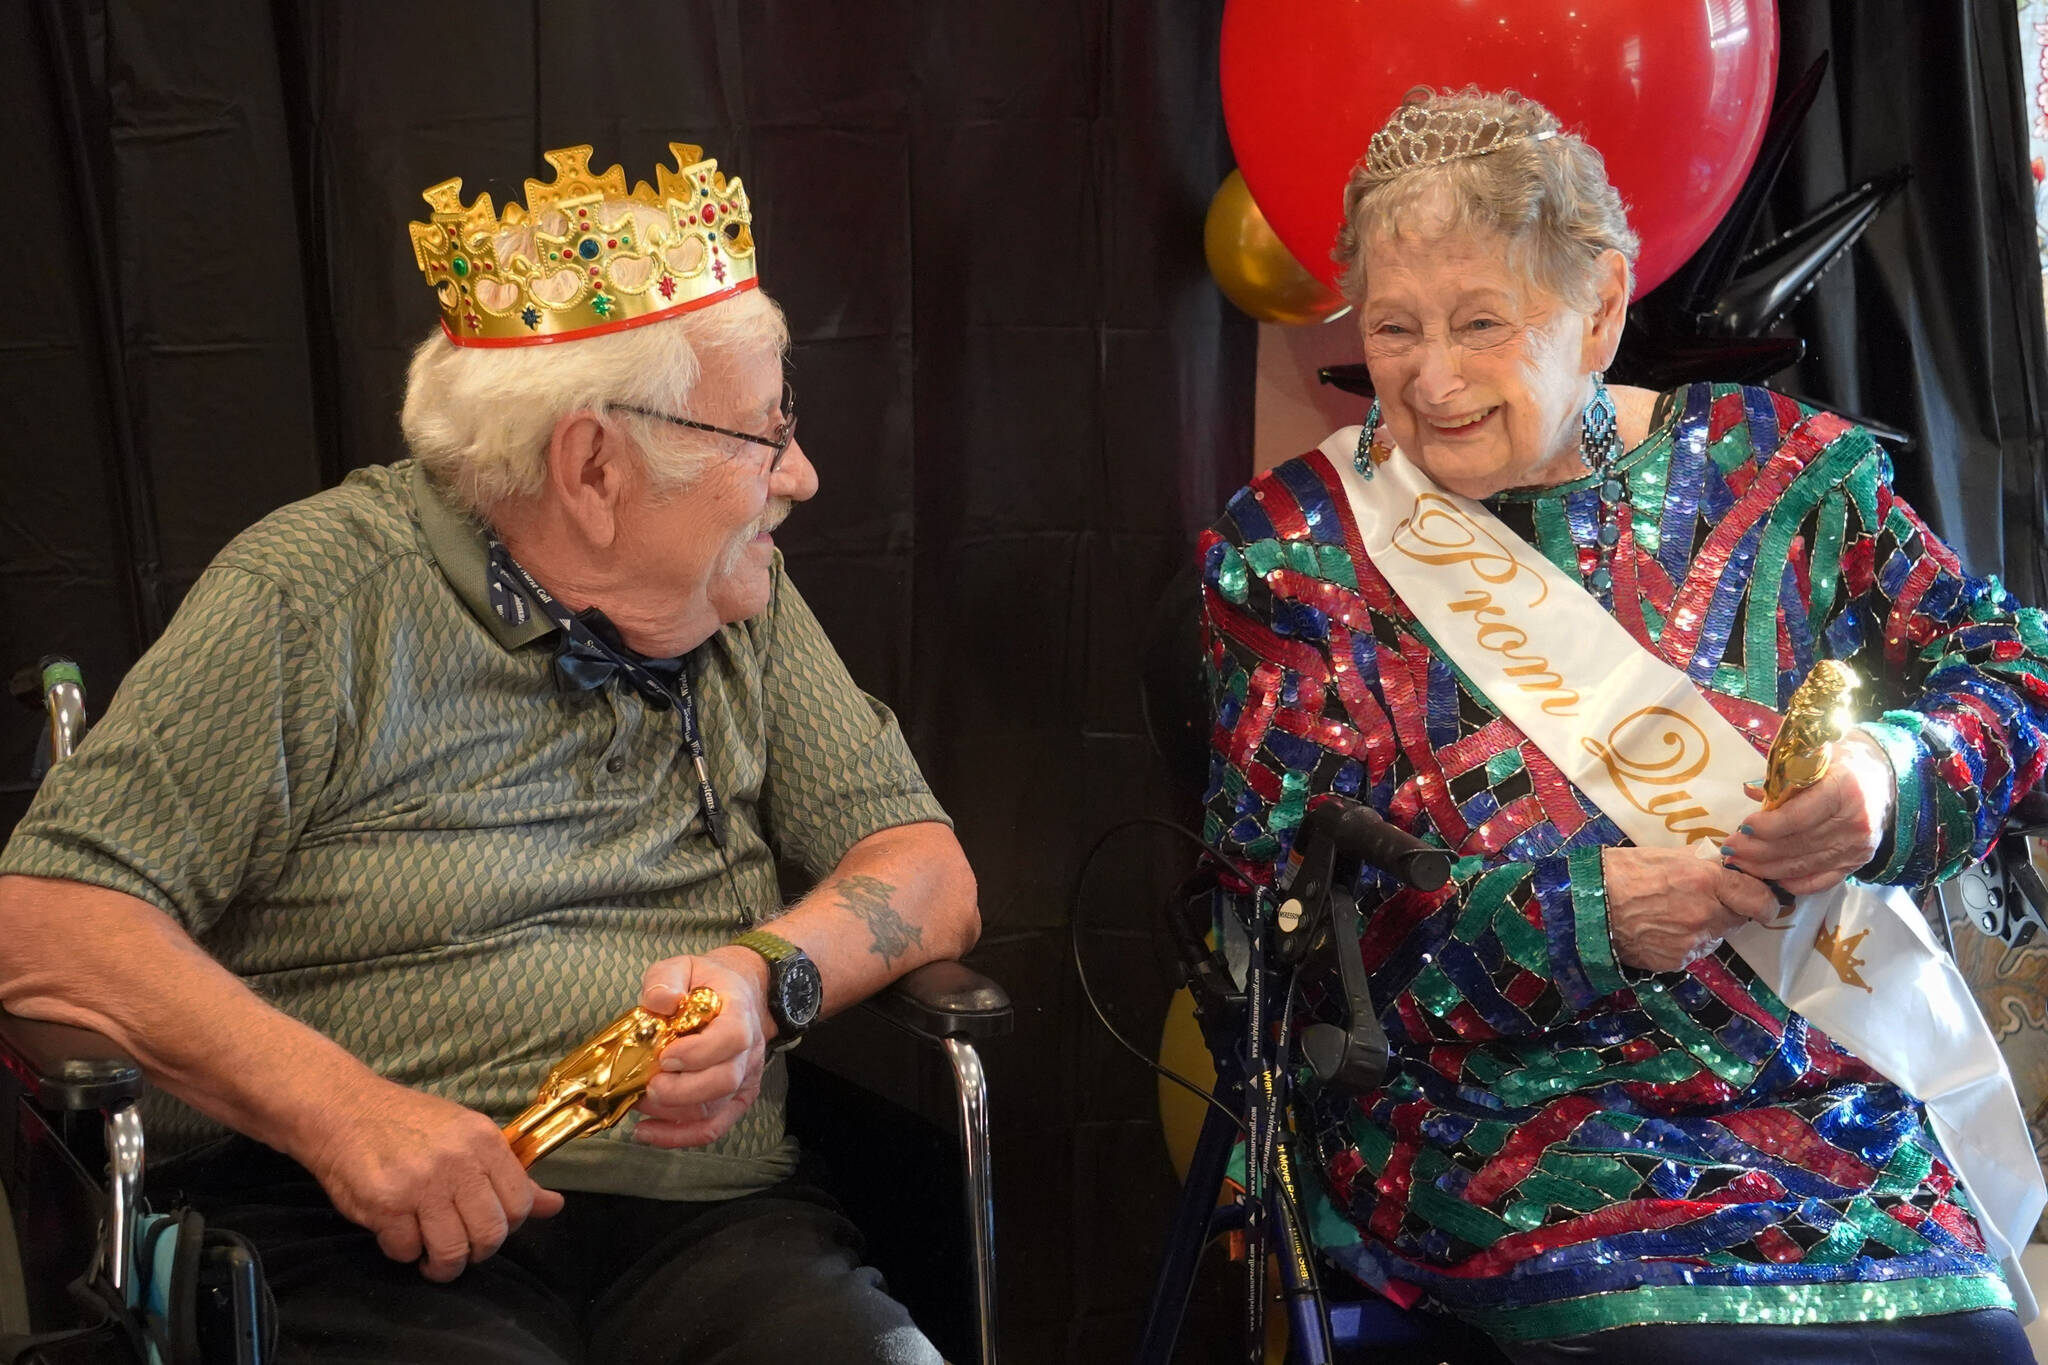 Jake Dye/Peninsula Clarion
Senior Prom King and Queen Dennis Borbon and Lorraine Ashcraft are crowned at the 2023 High Roller Senior Prom at Aspen Creek Senior Living in Kenai, Alaska, on Friday, Sept. 22, 2023.